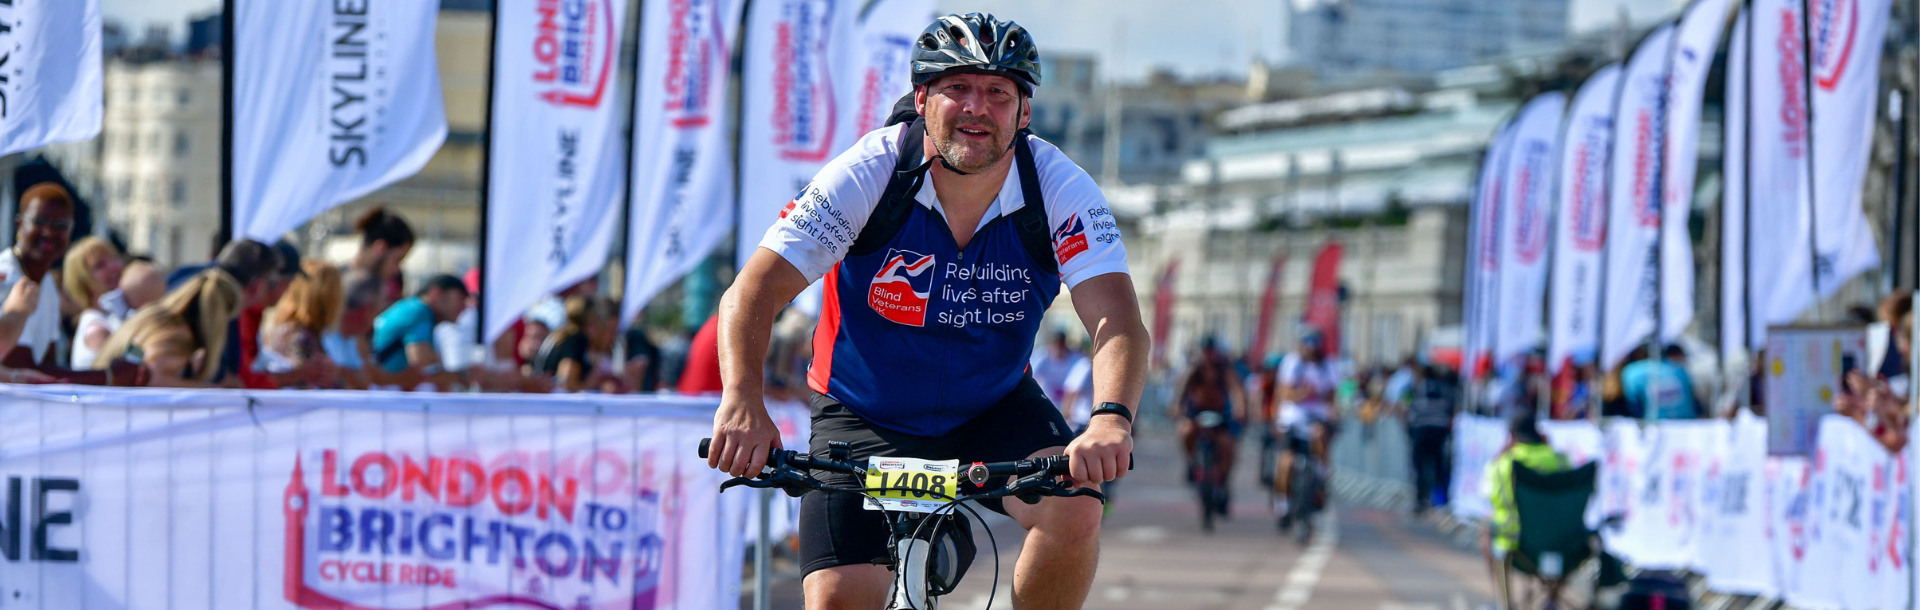 Supporter Gary on his bike, crossing the finish line of the race wearing a Blind Veterans UK T-shirt